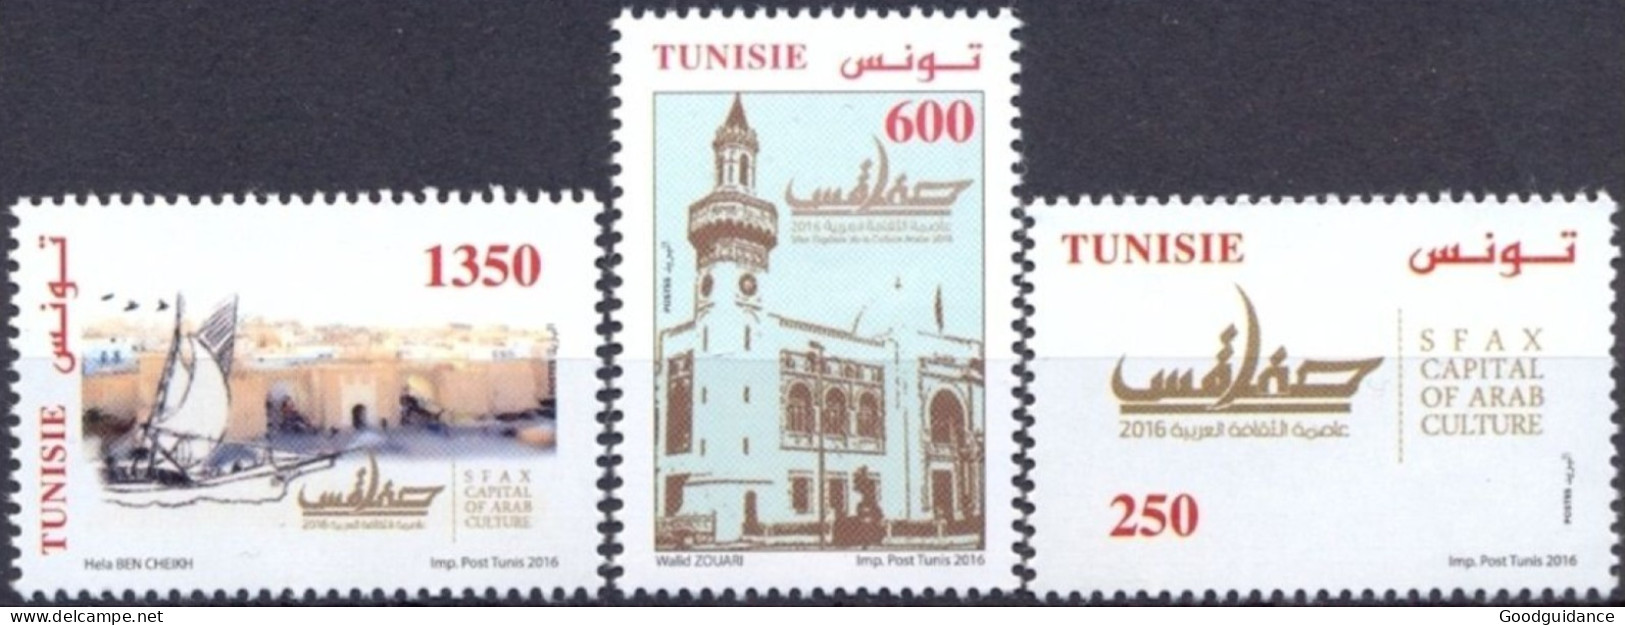 2016- Tunisia- Sfax Capital Of Arab Culture 2016- Mosque- Calligraphy - Boats - Complete 3V. MNH** - Mezquitas Y Sinagogas